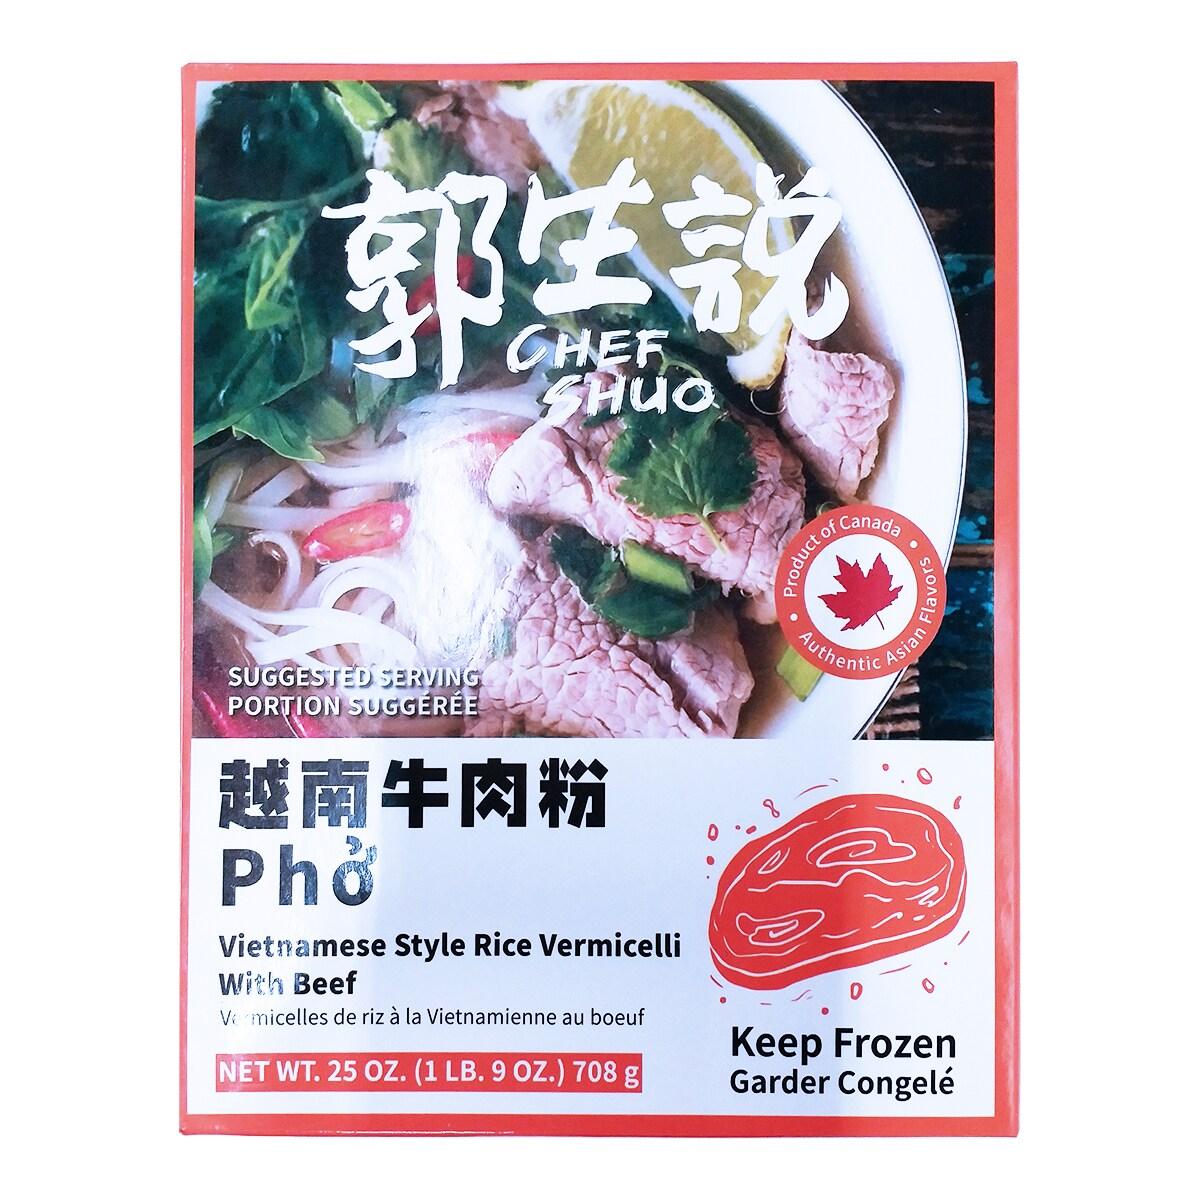 chef-shuo-pho-vietnamese-vermicelli-with-beef